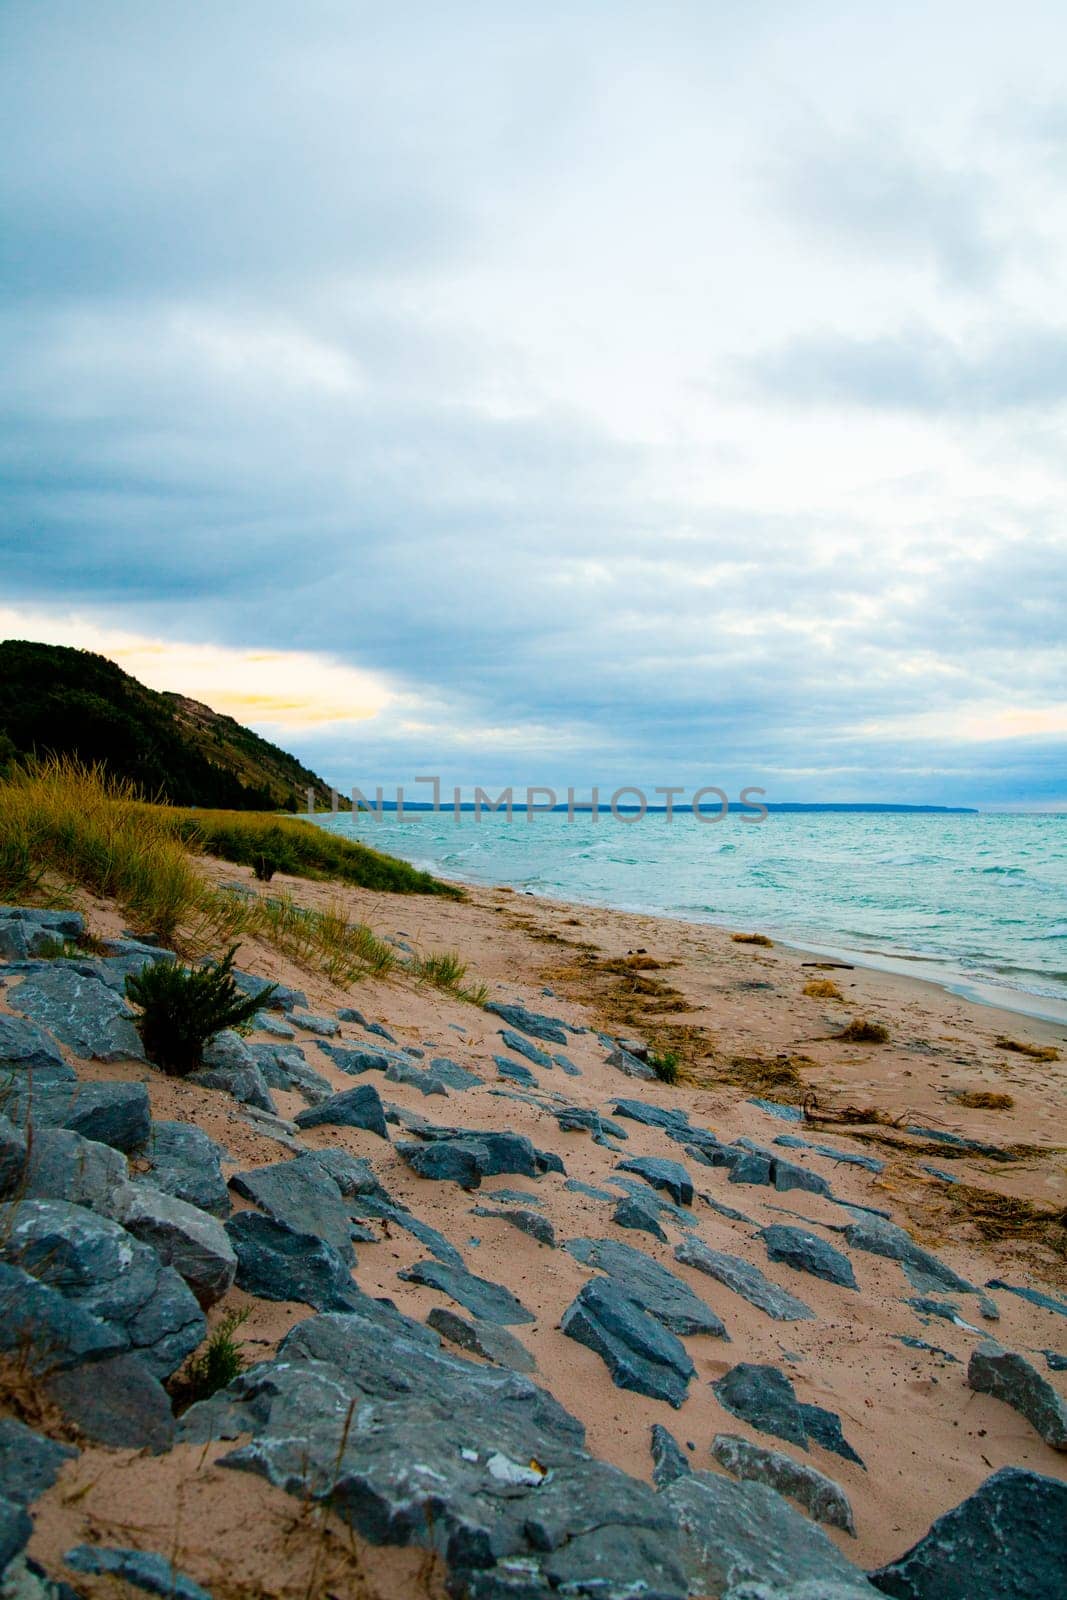 Tranquil dawn on a serene beach along Lake Michigan's rocky shoreline, offering a peaceful escape amidst nature's beauty. Perfect for travel and environmental themes.